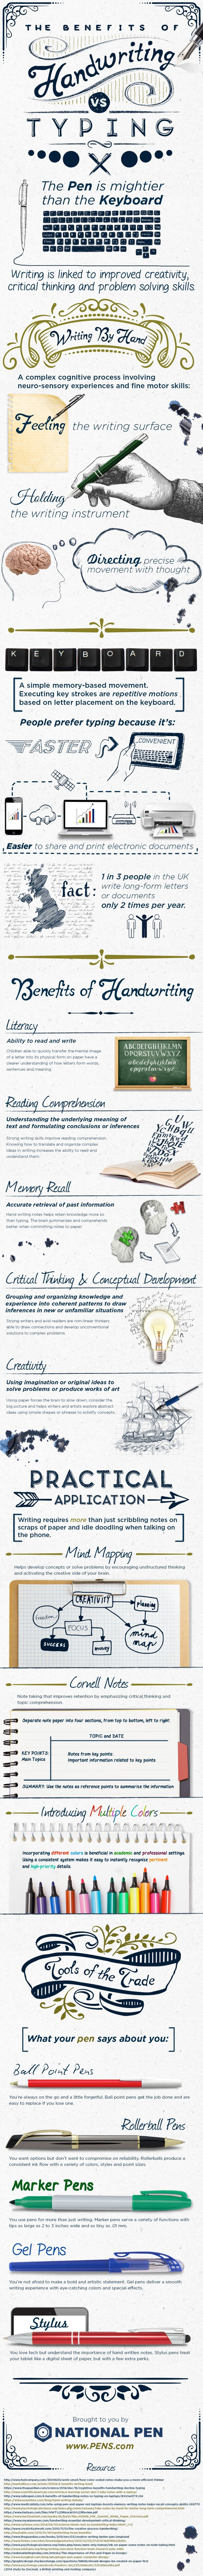 The Benefits of Handwriting vs Typing - Infographic